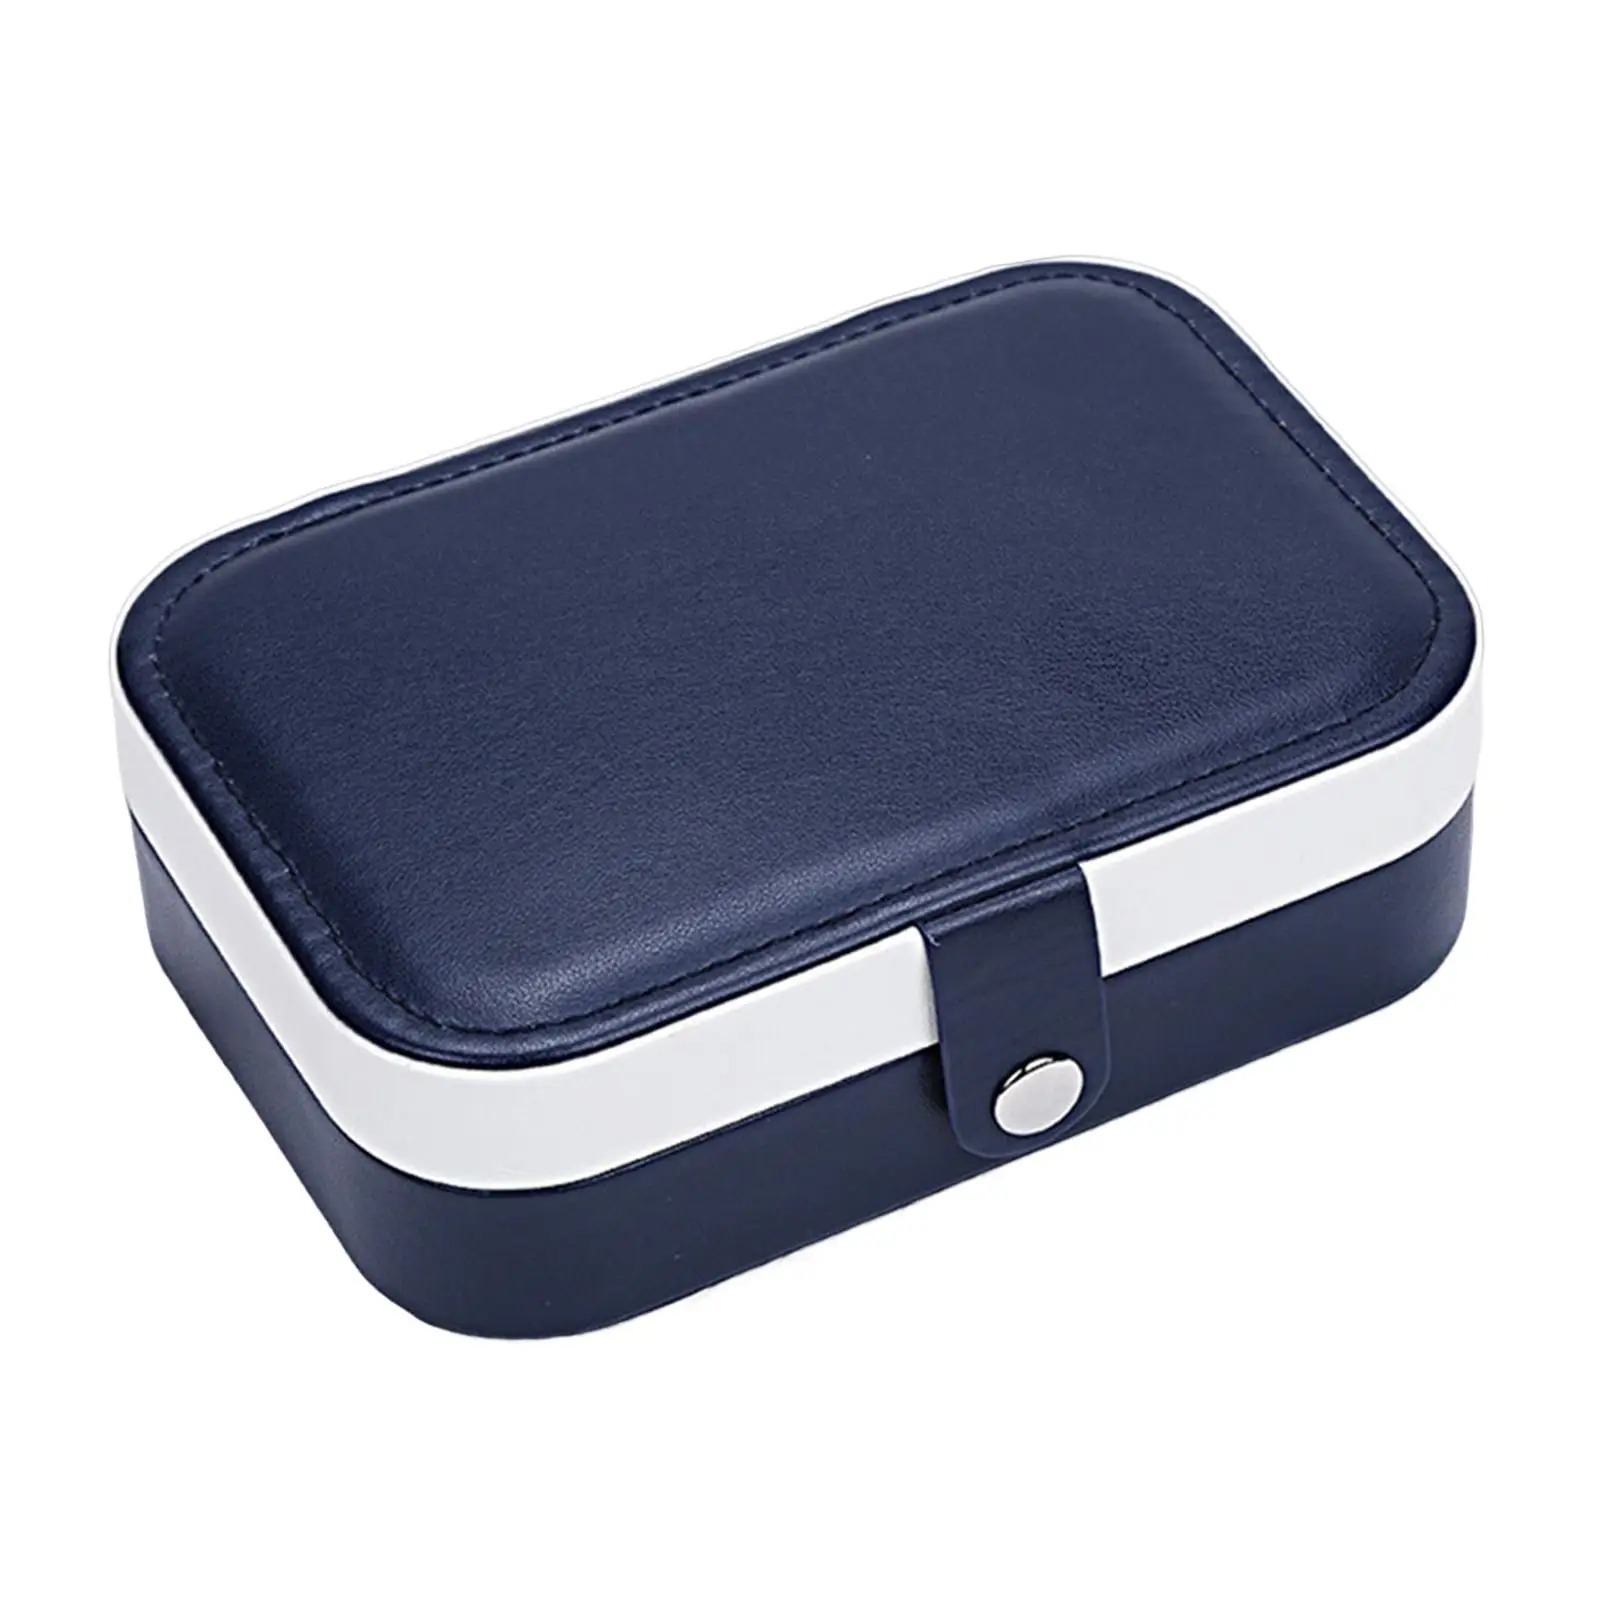 Small Jewelry Box Organizer 2 Layer PU Leather Gift Waterproof Dustproof Storage Case for Watches Earrings Bracelets Rings Girls